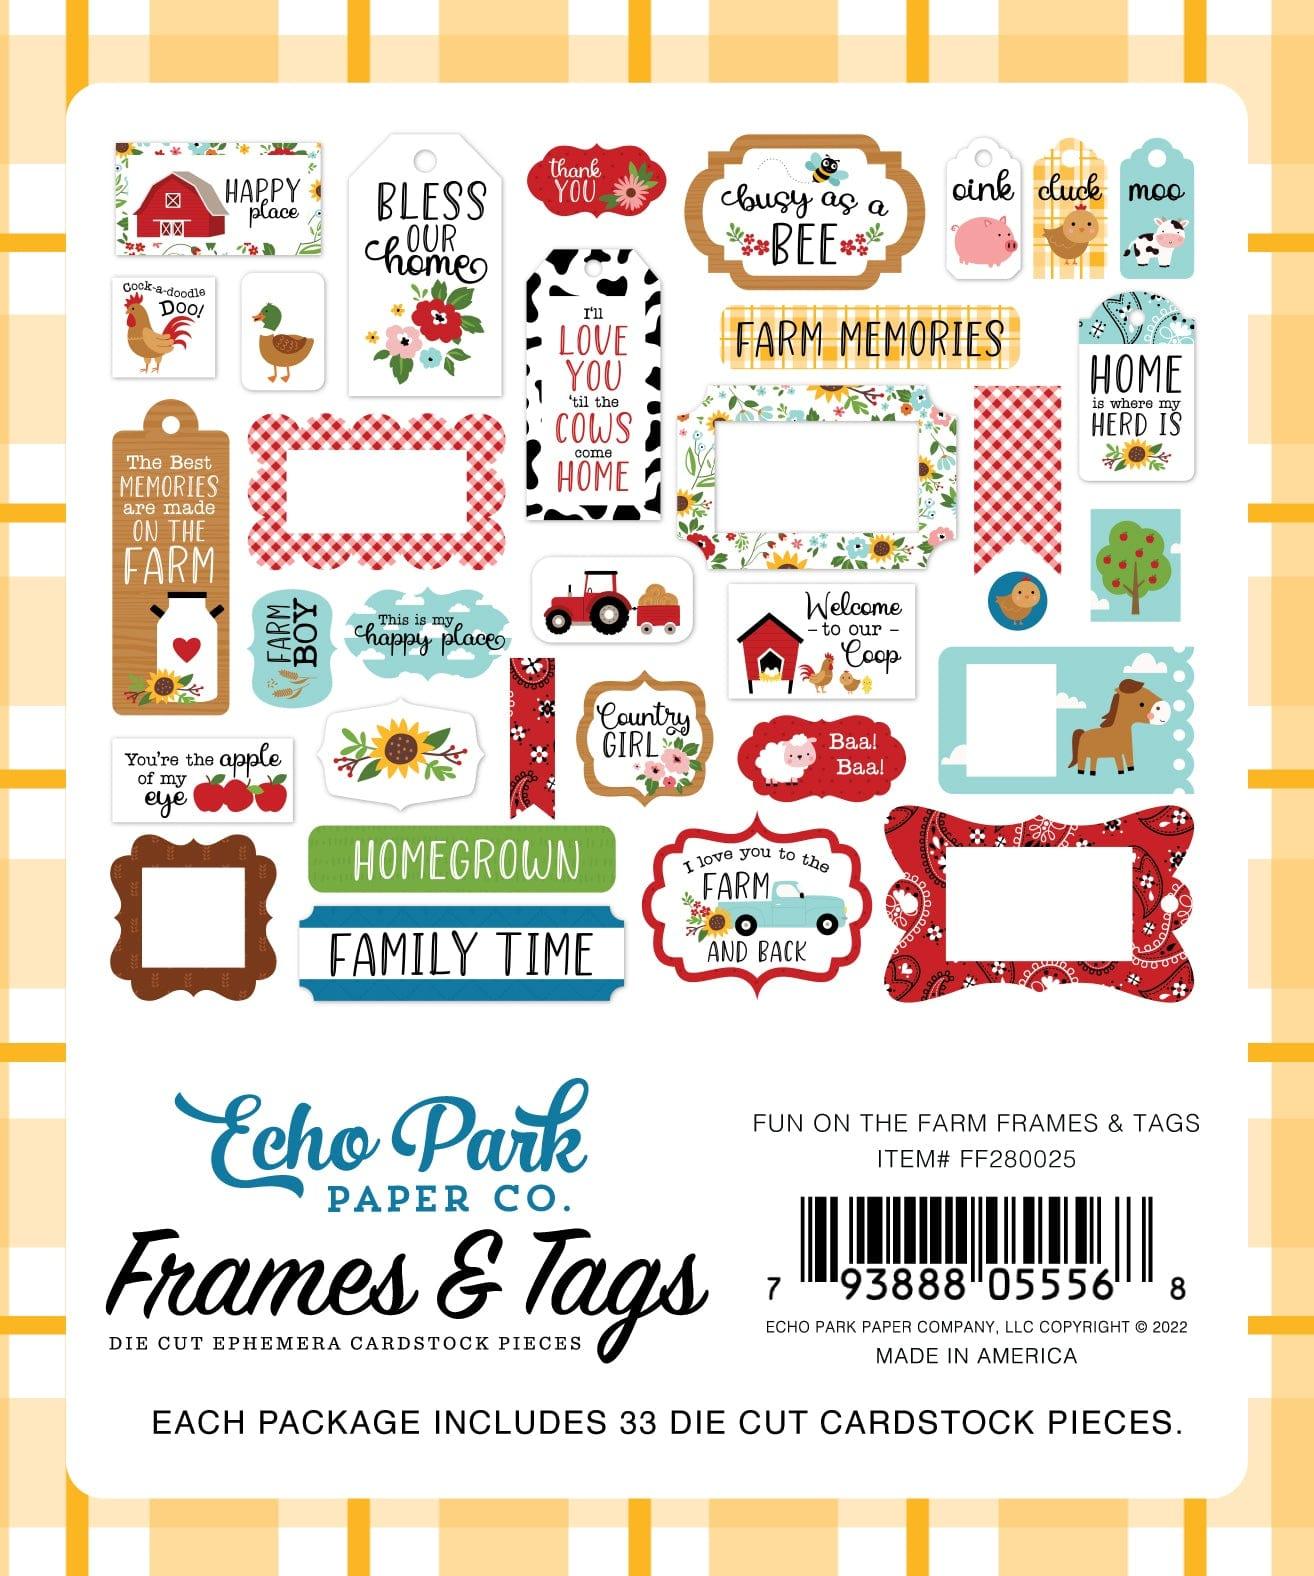 Fun On The Farm Collection 5 x 5 Scrapbook Tags & Frames Die Cuts by Echo Park Paper - Scrapbook Supply Companies